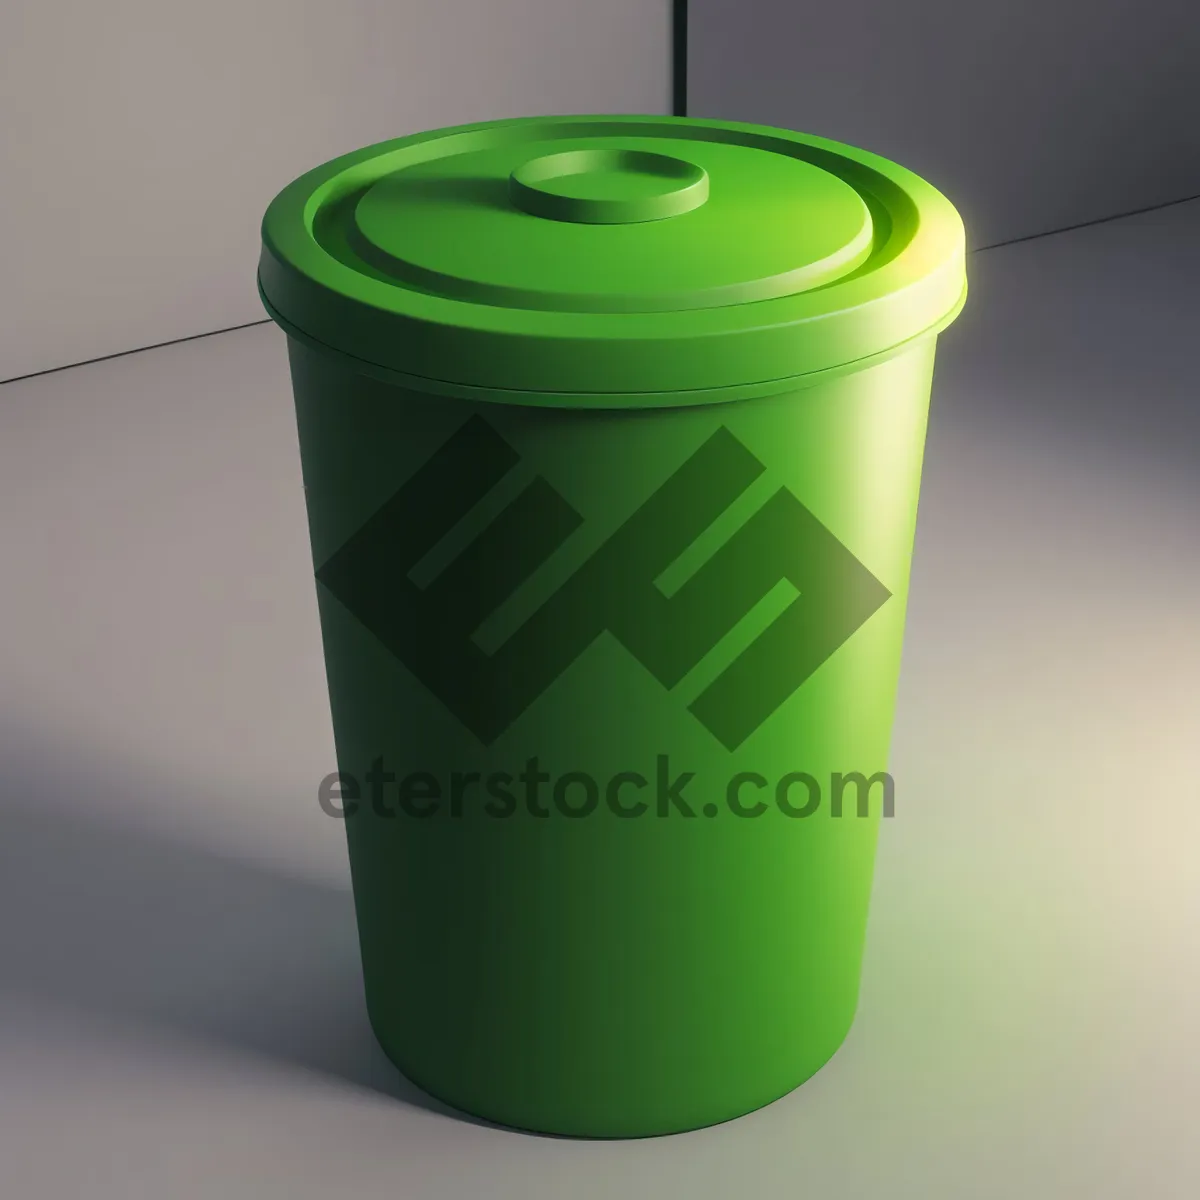 Picture of Plastic Cup and Pencil Sharpener in Container